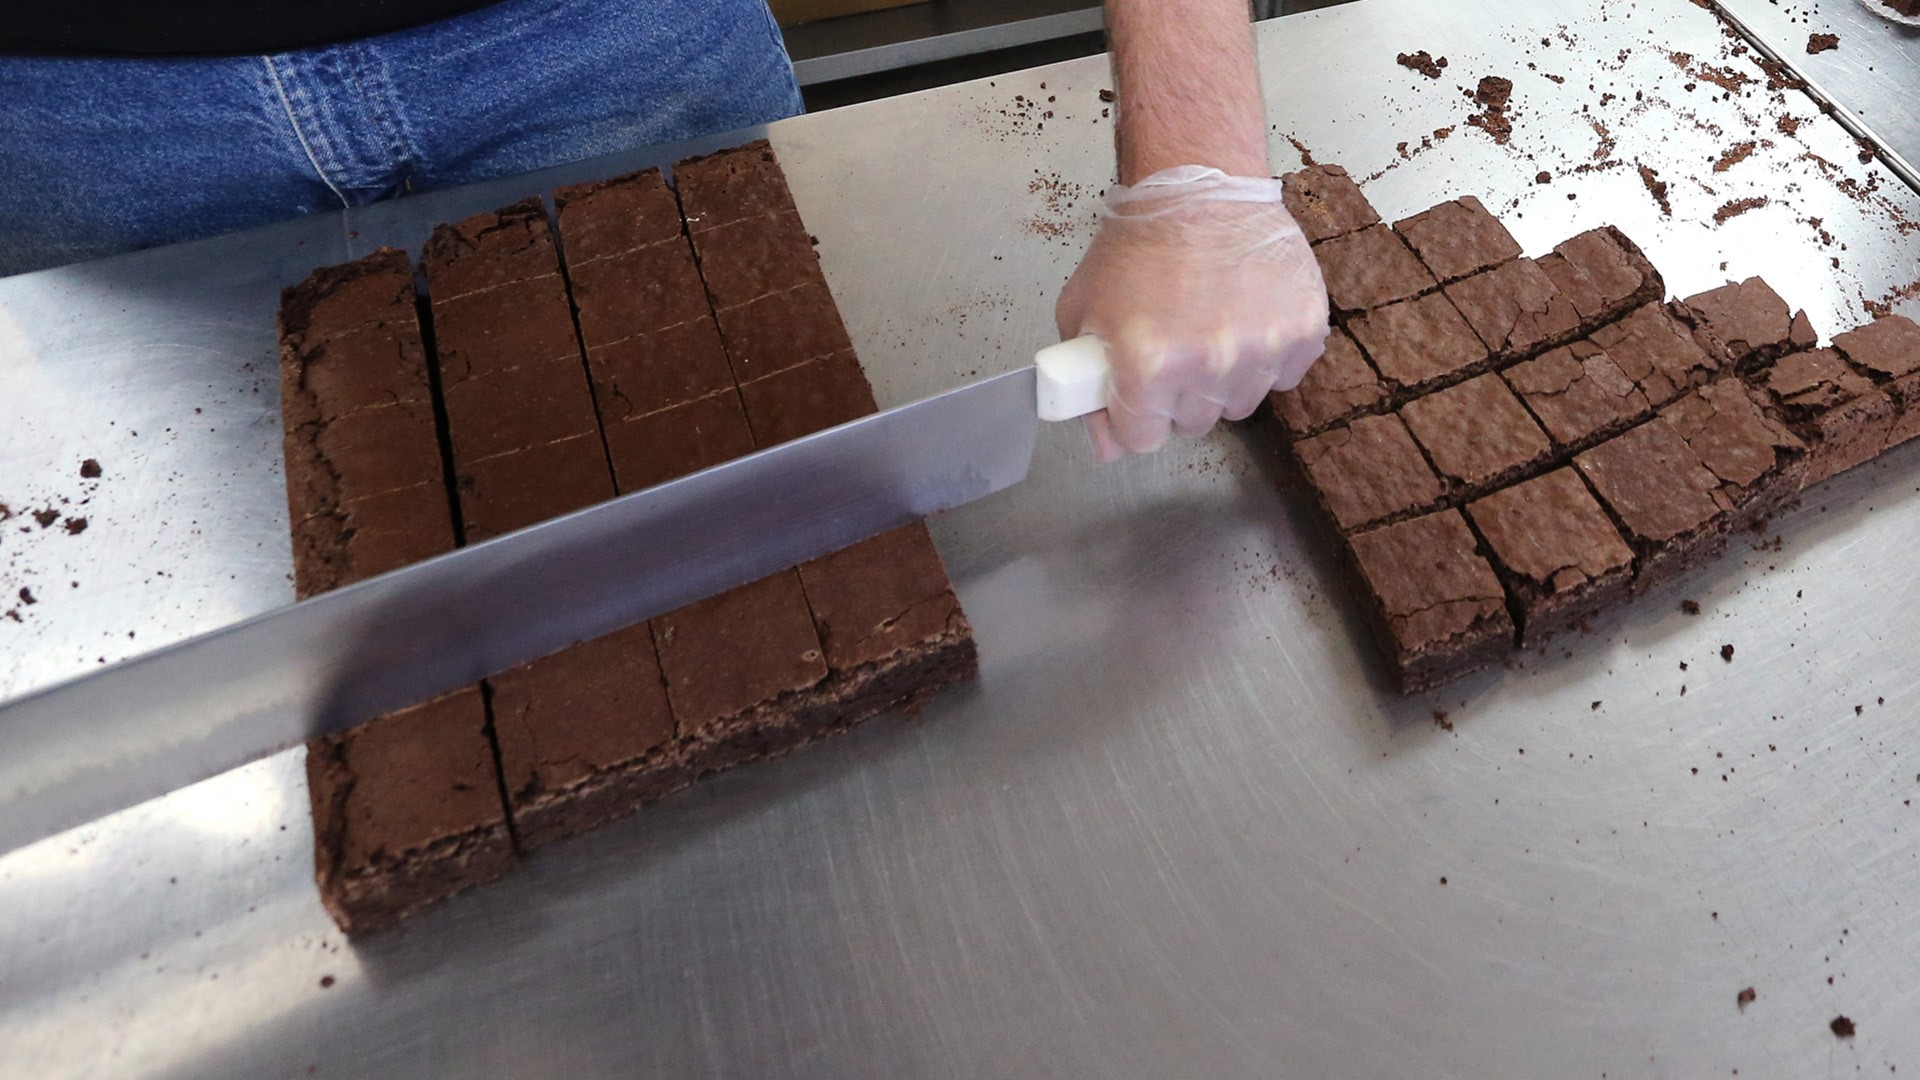 A new study finds chocolate appears to interfere with the ability to measure THC, the high-inducing chemical in marijuana. (AP)